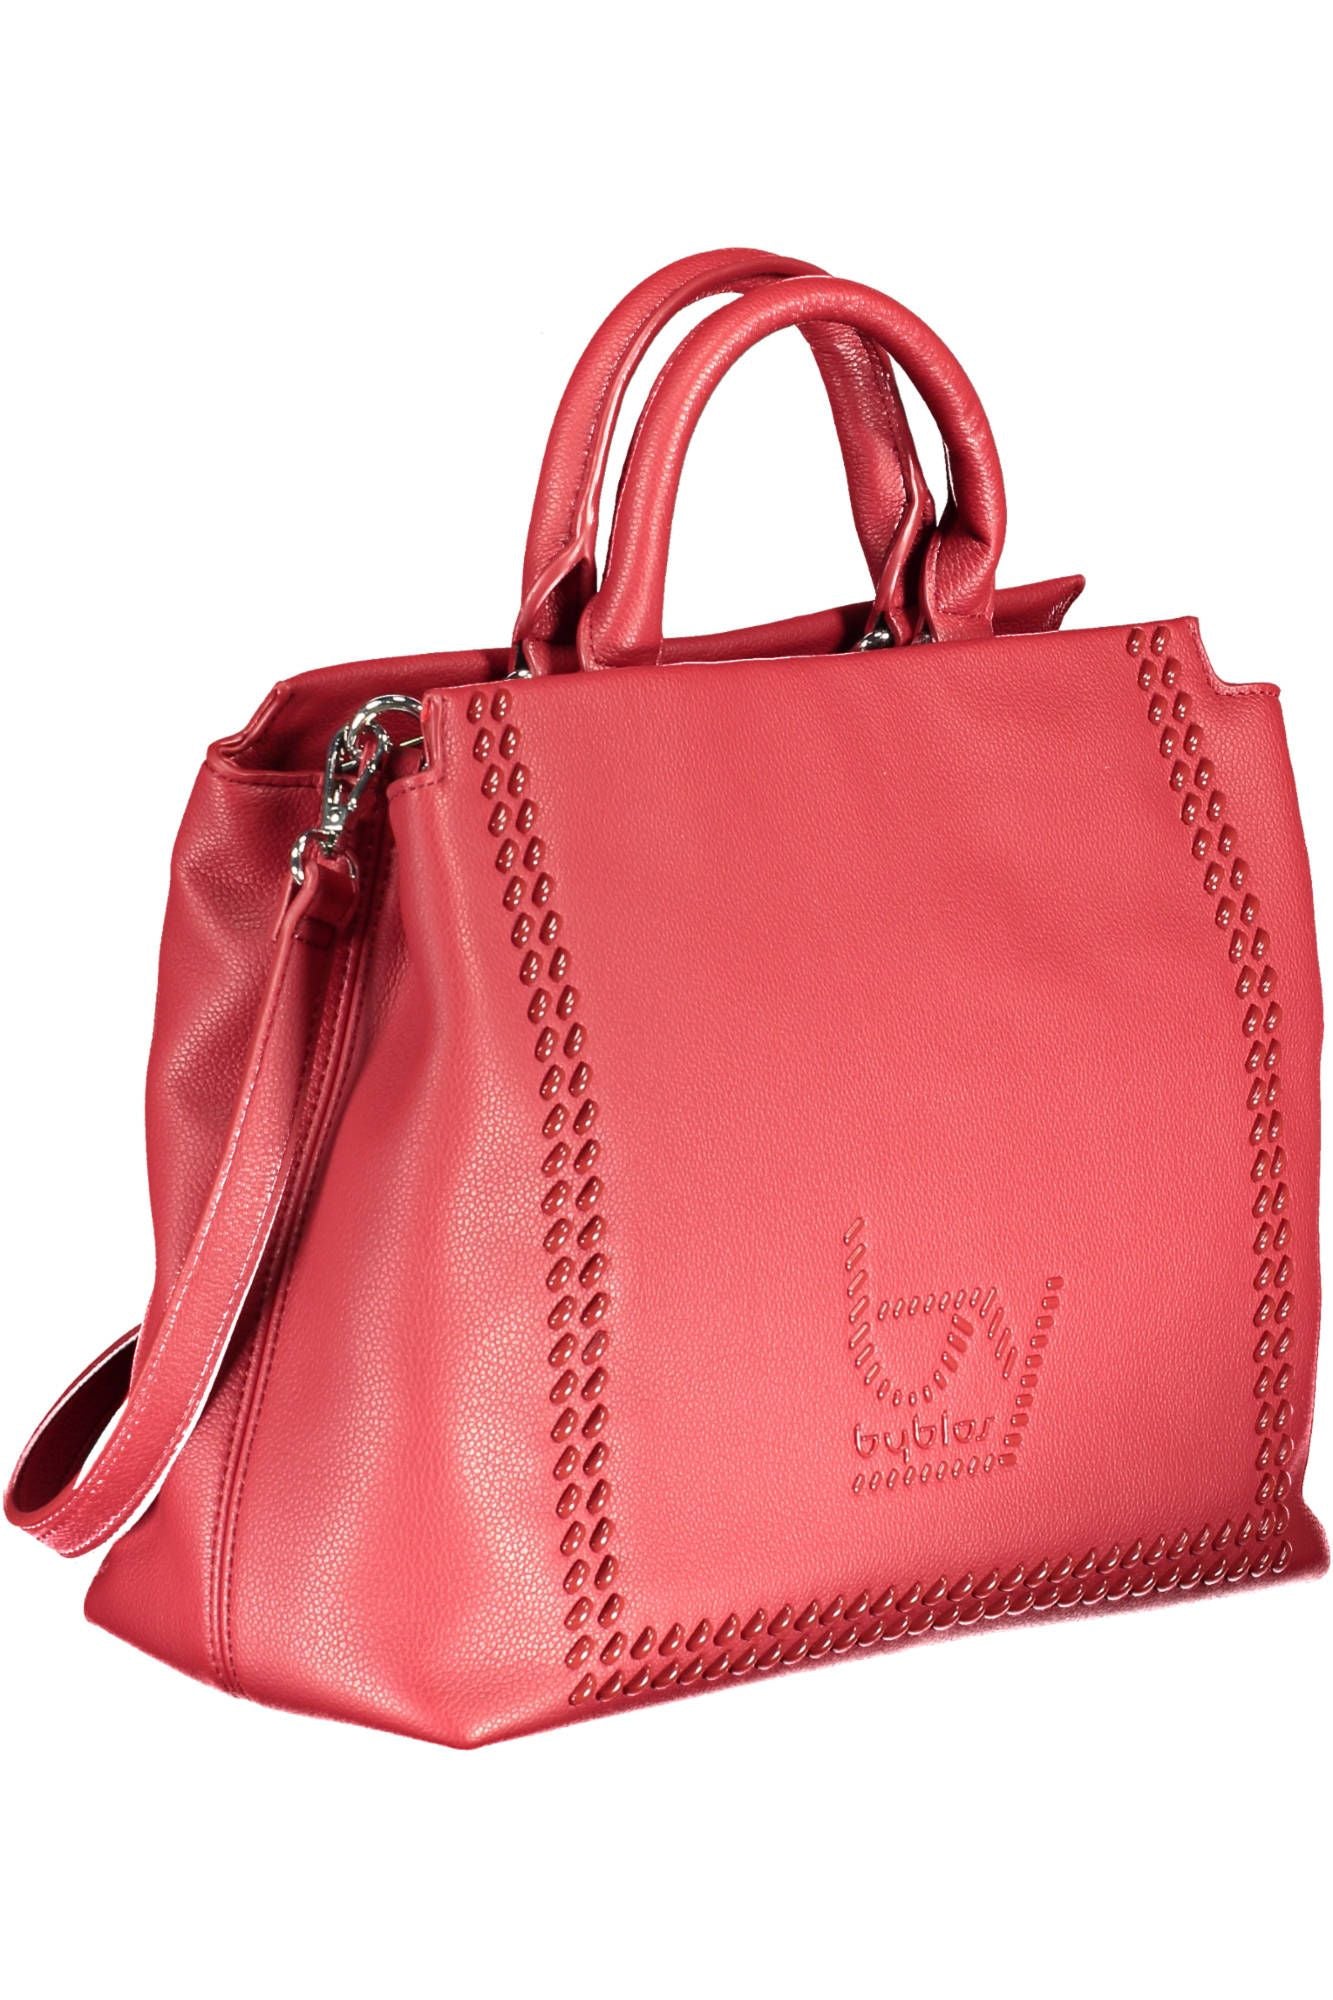 Elegant Red Two-Compartment Handbag with Logo Detail